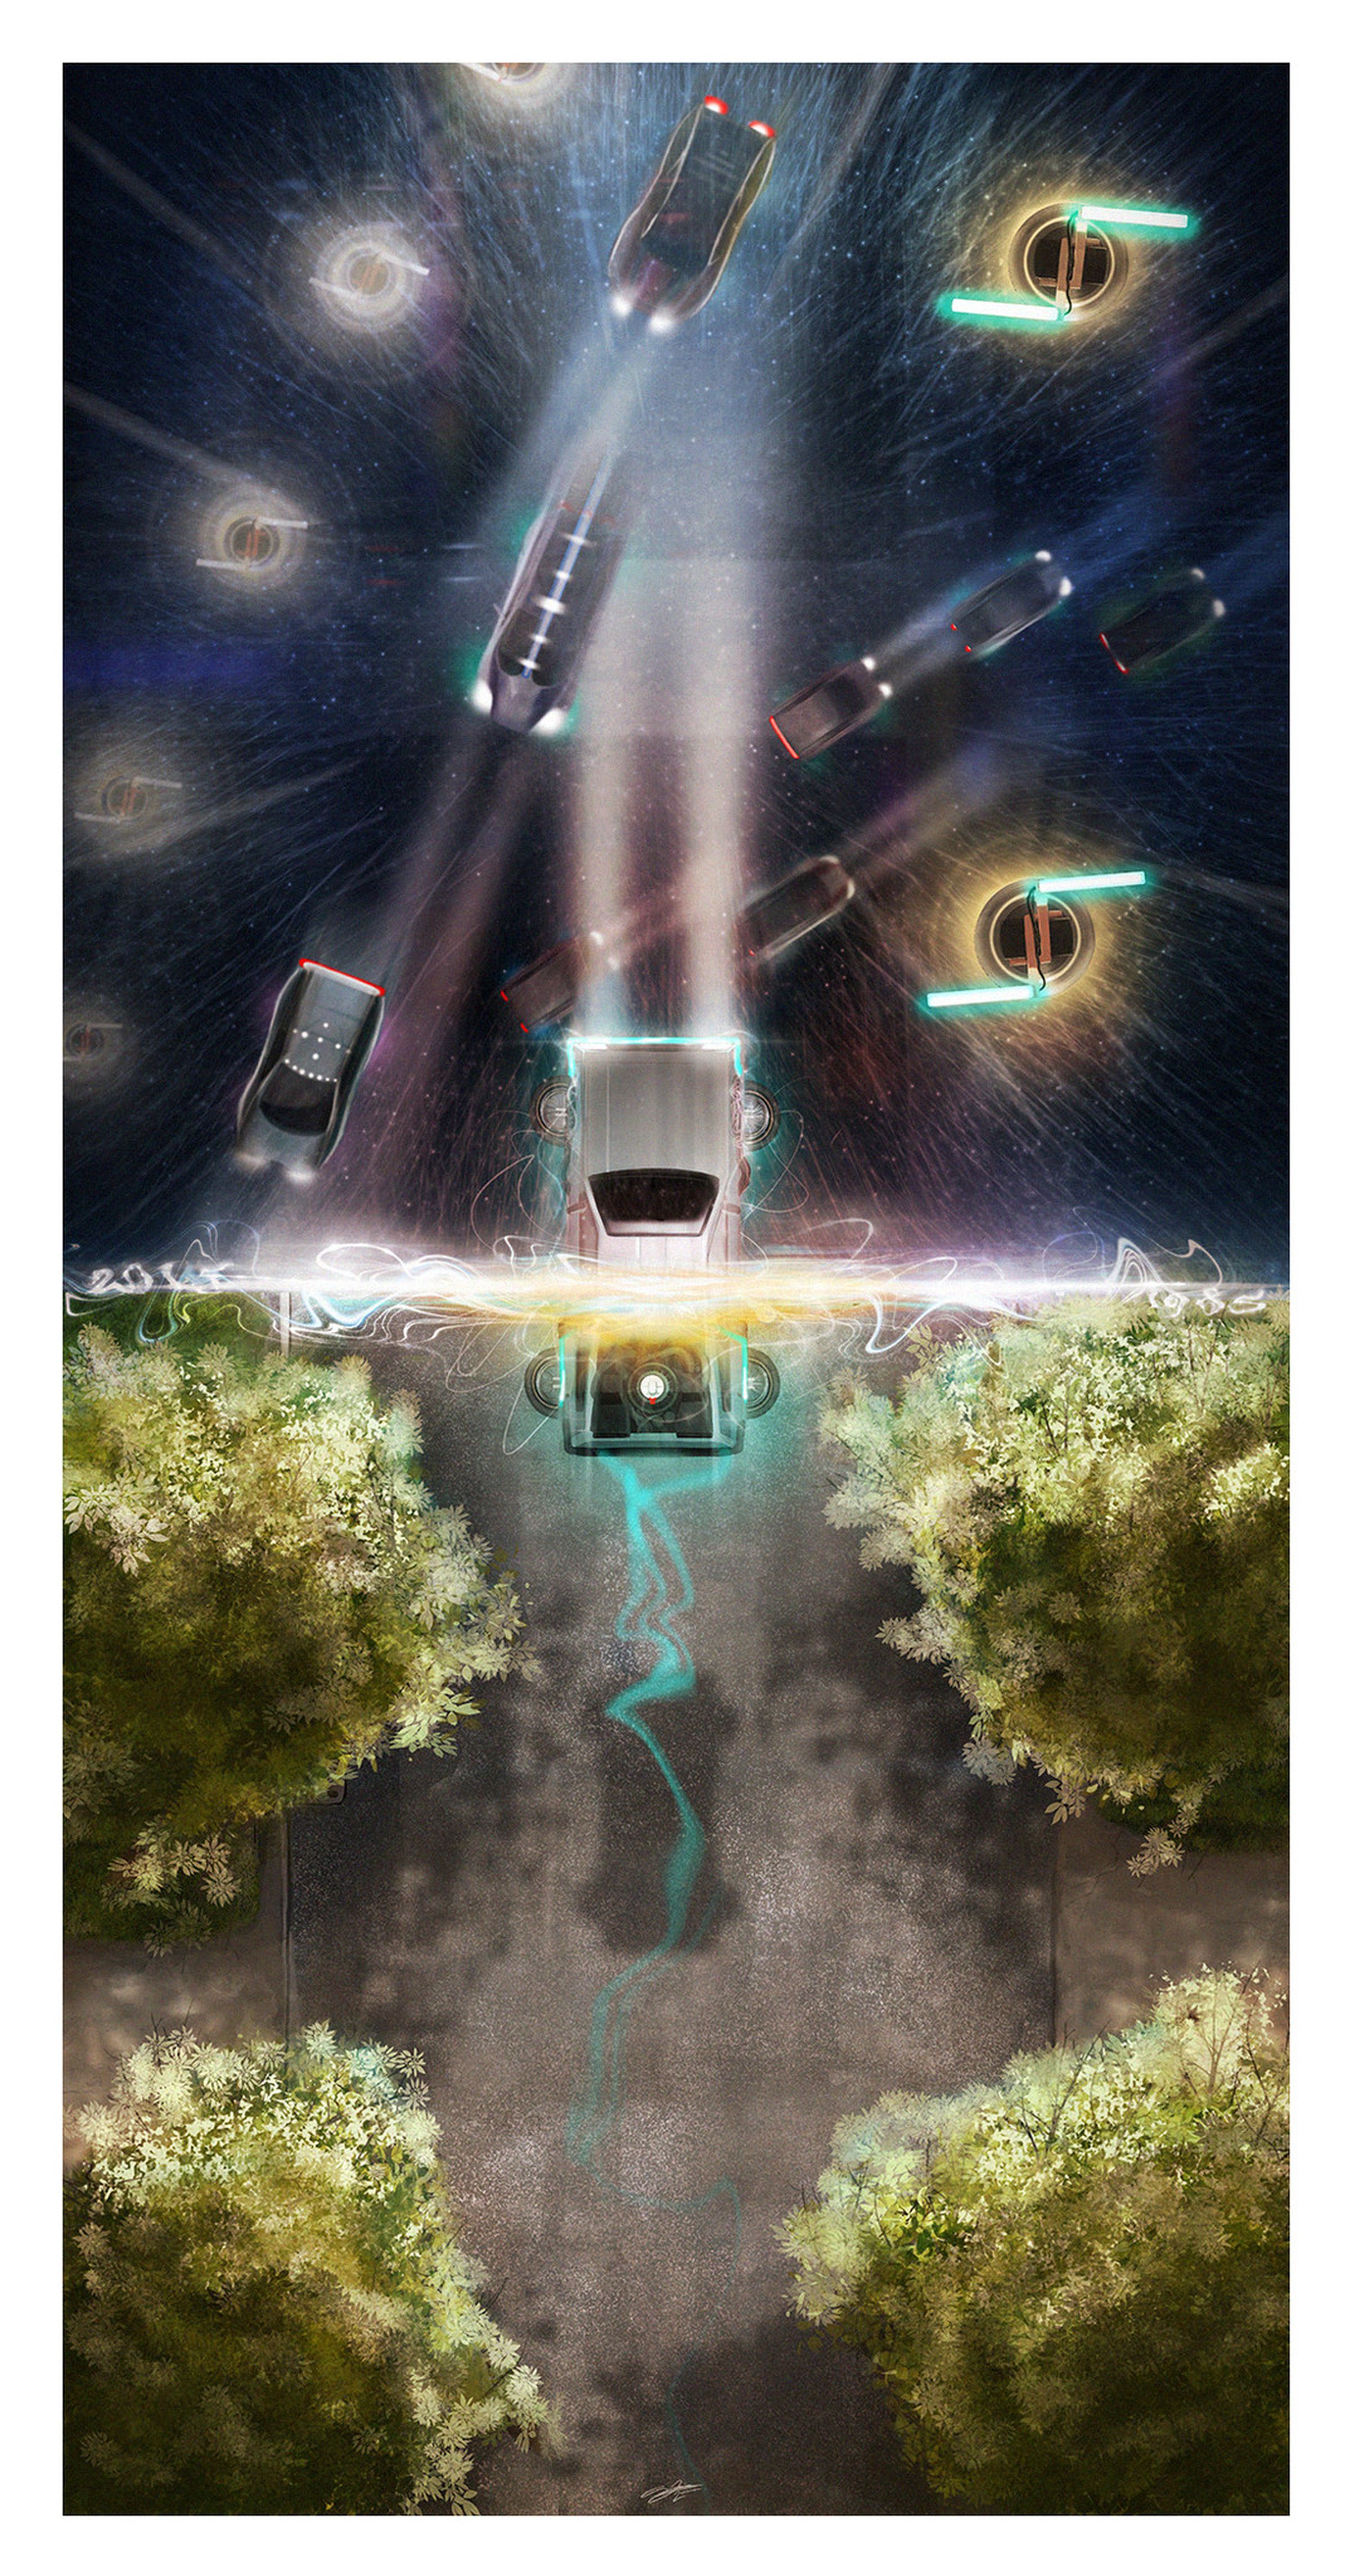 These Back to the Future posters show time travel in an instant